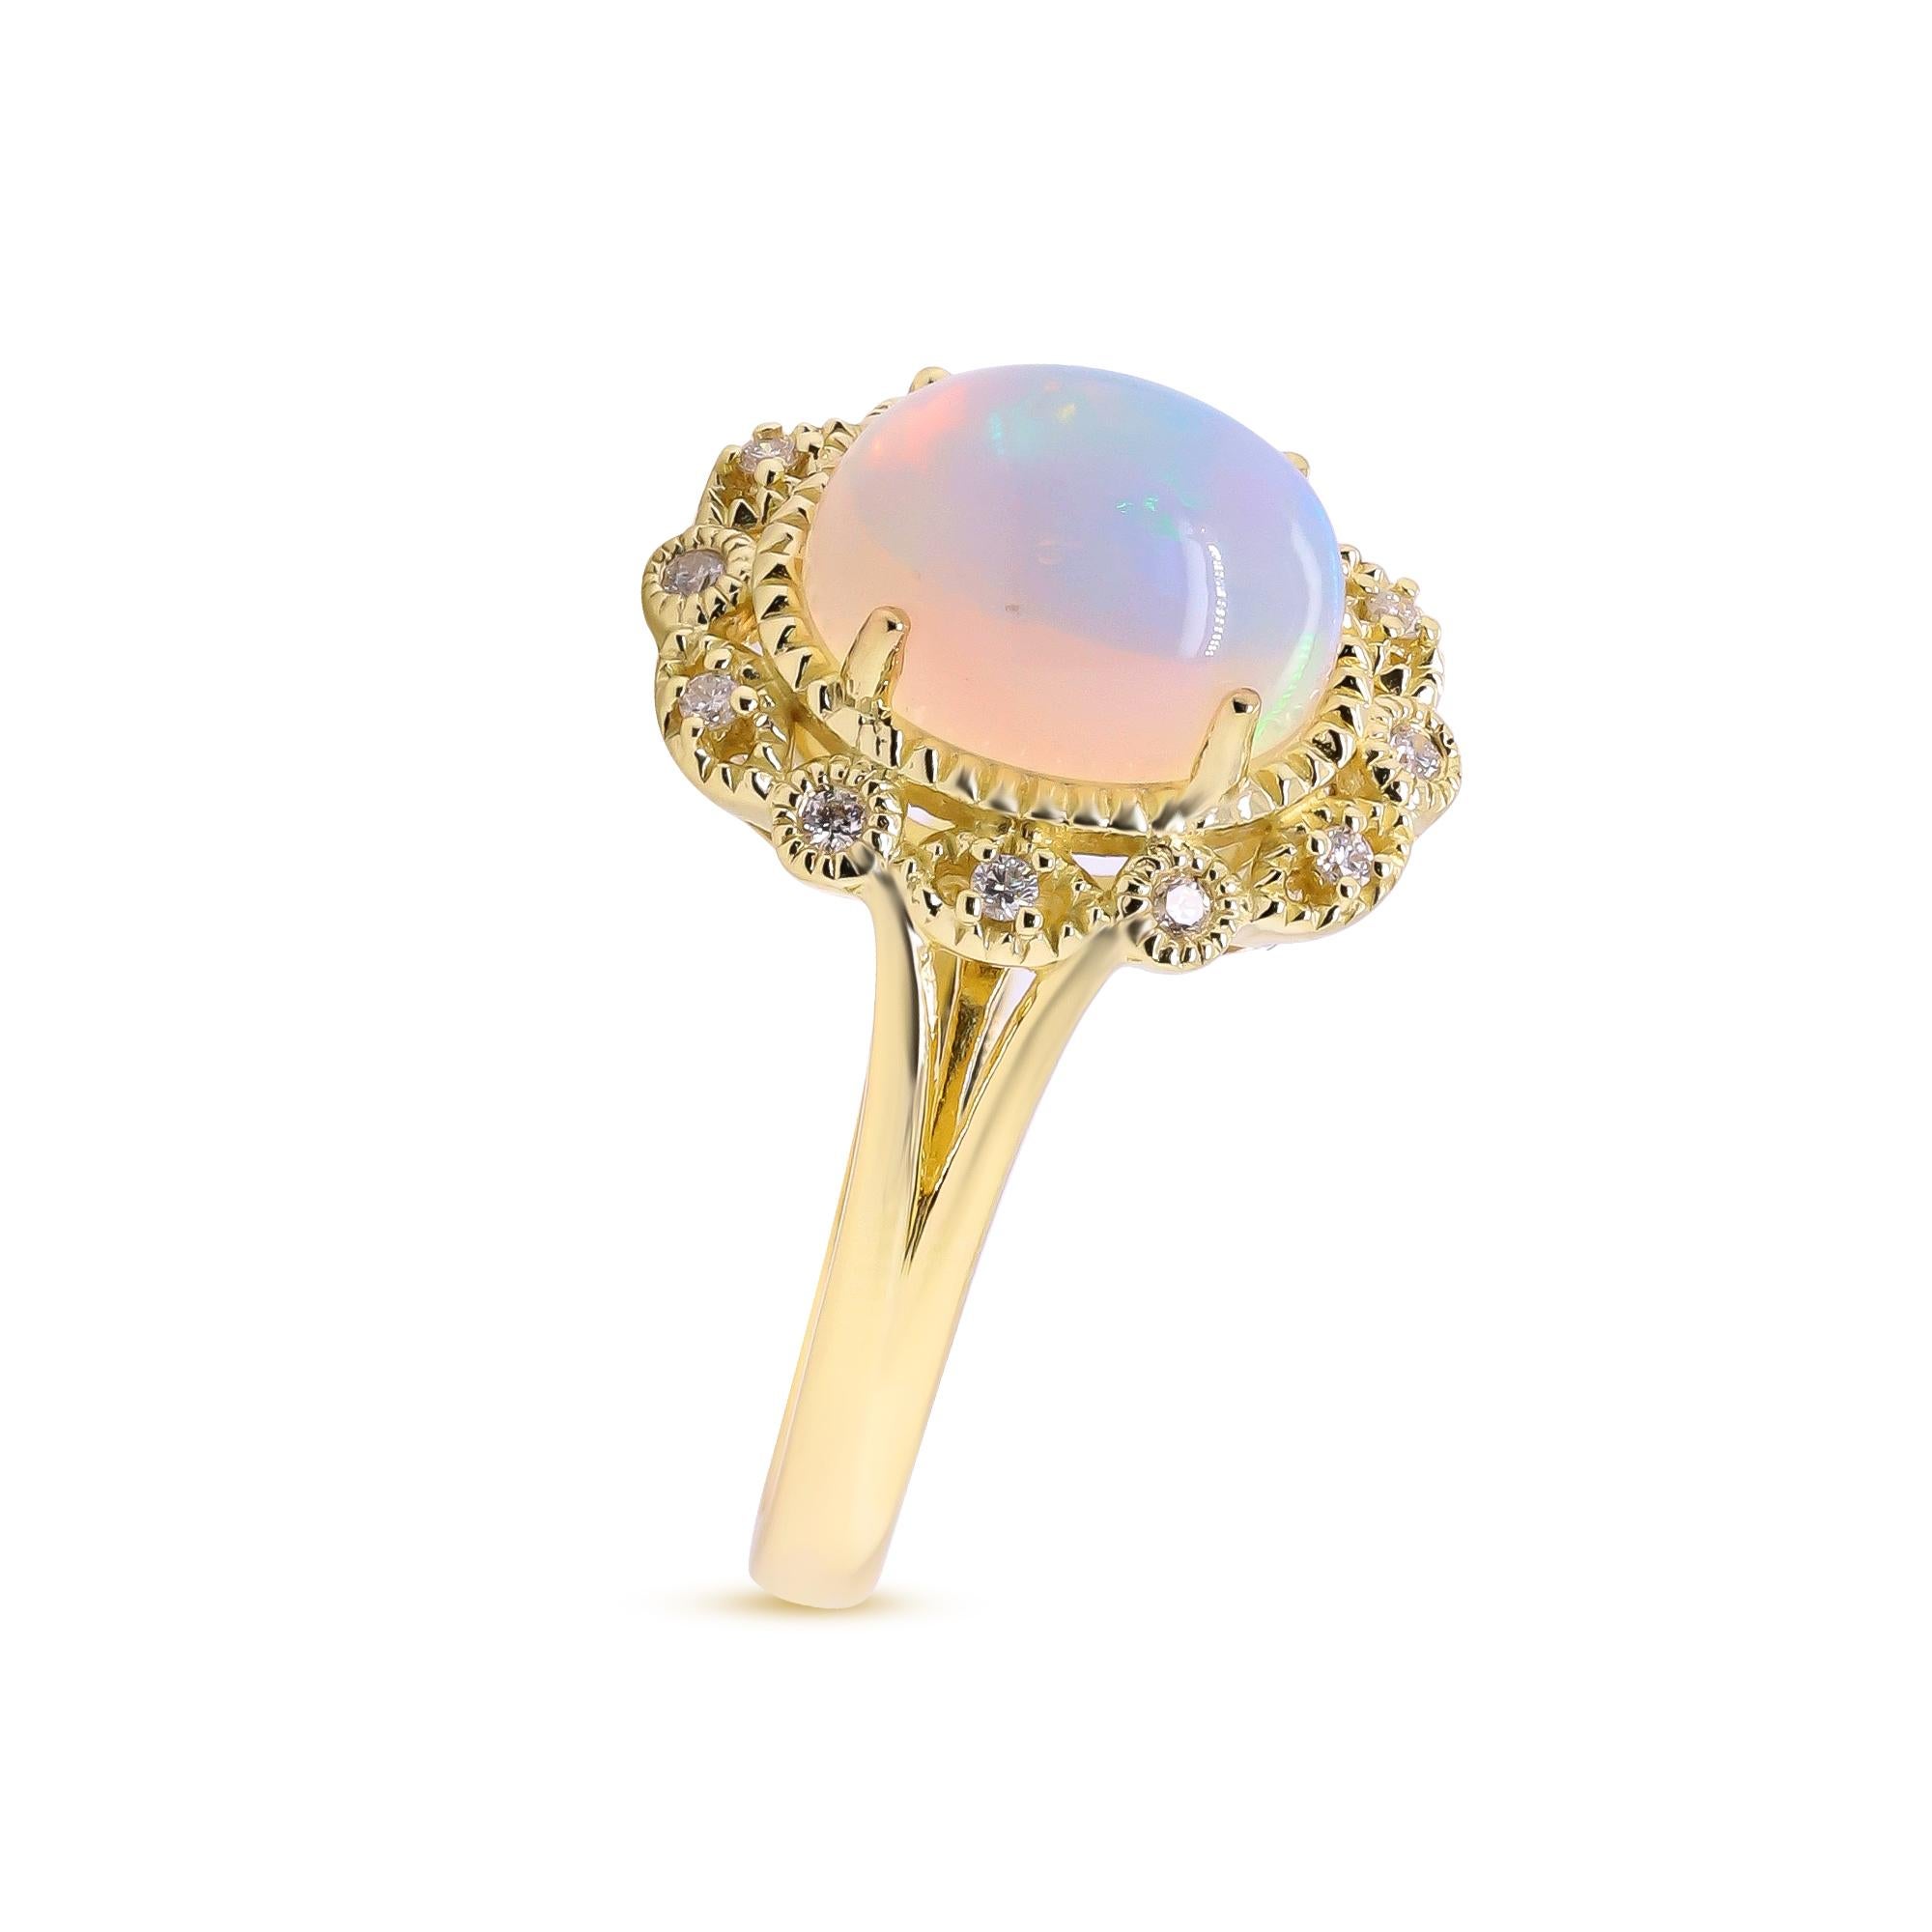 Stunning, timeless and classy eternity Unique Ring. Decorate yourself in luxury with this Gin & Grace Ring. The 10k Yellow Gold jewelry boasts Oval Cab Prong Setting Genuine Ethiopian Opal (1 pcs) 1.85 Carat, along with Natural Round cut white